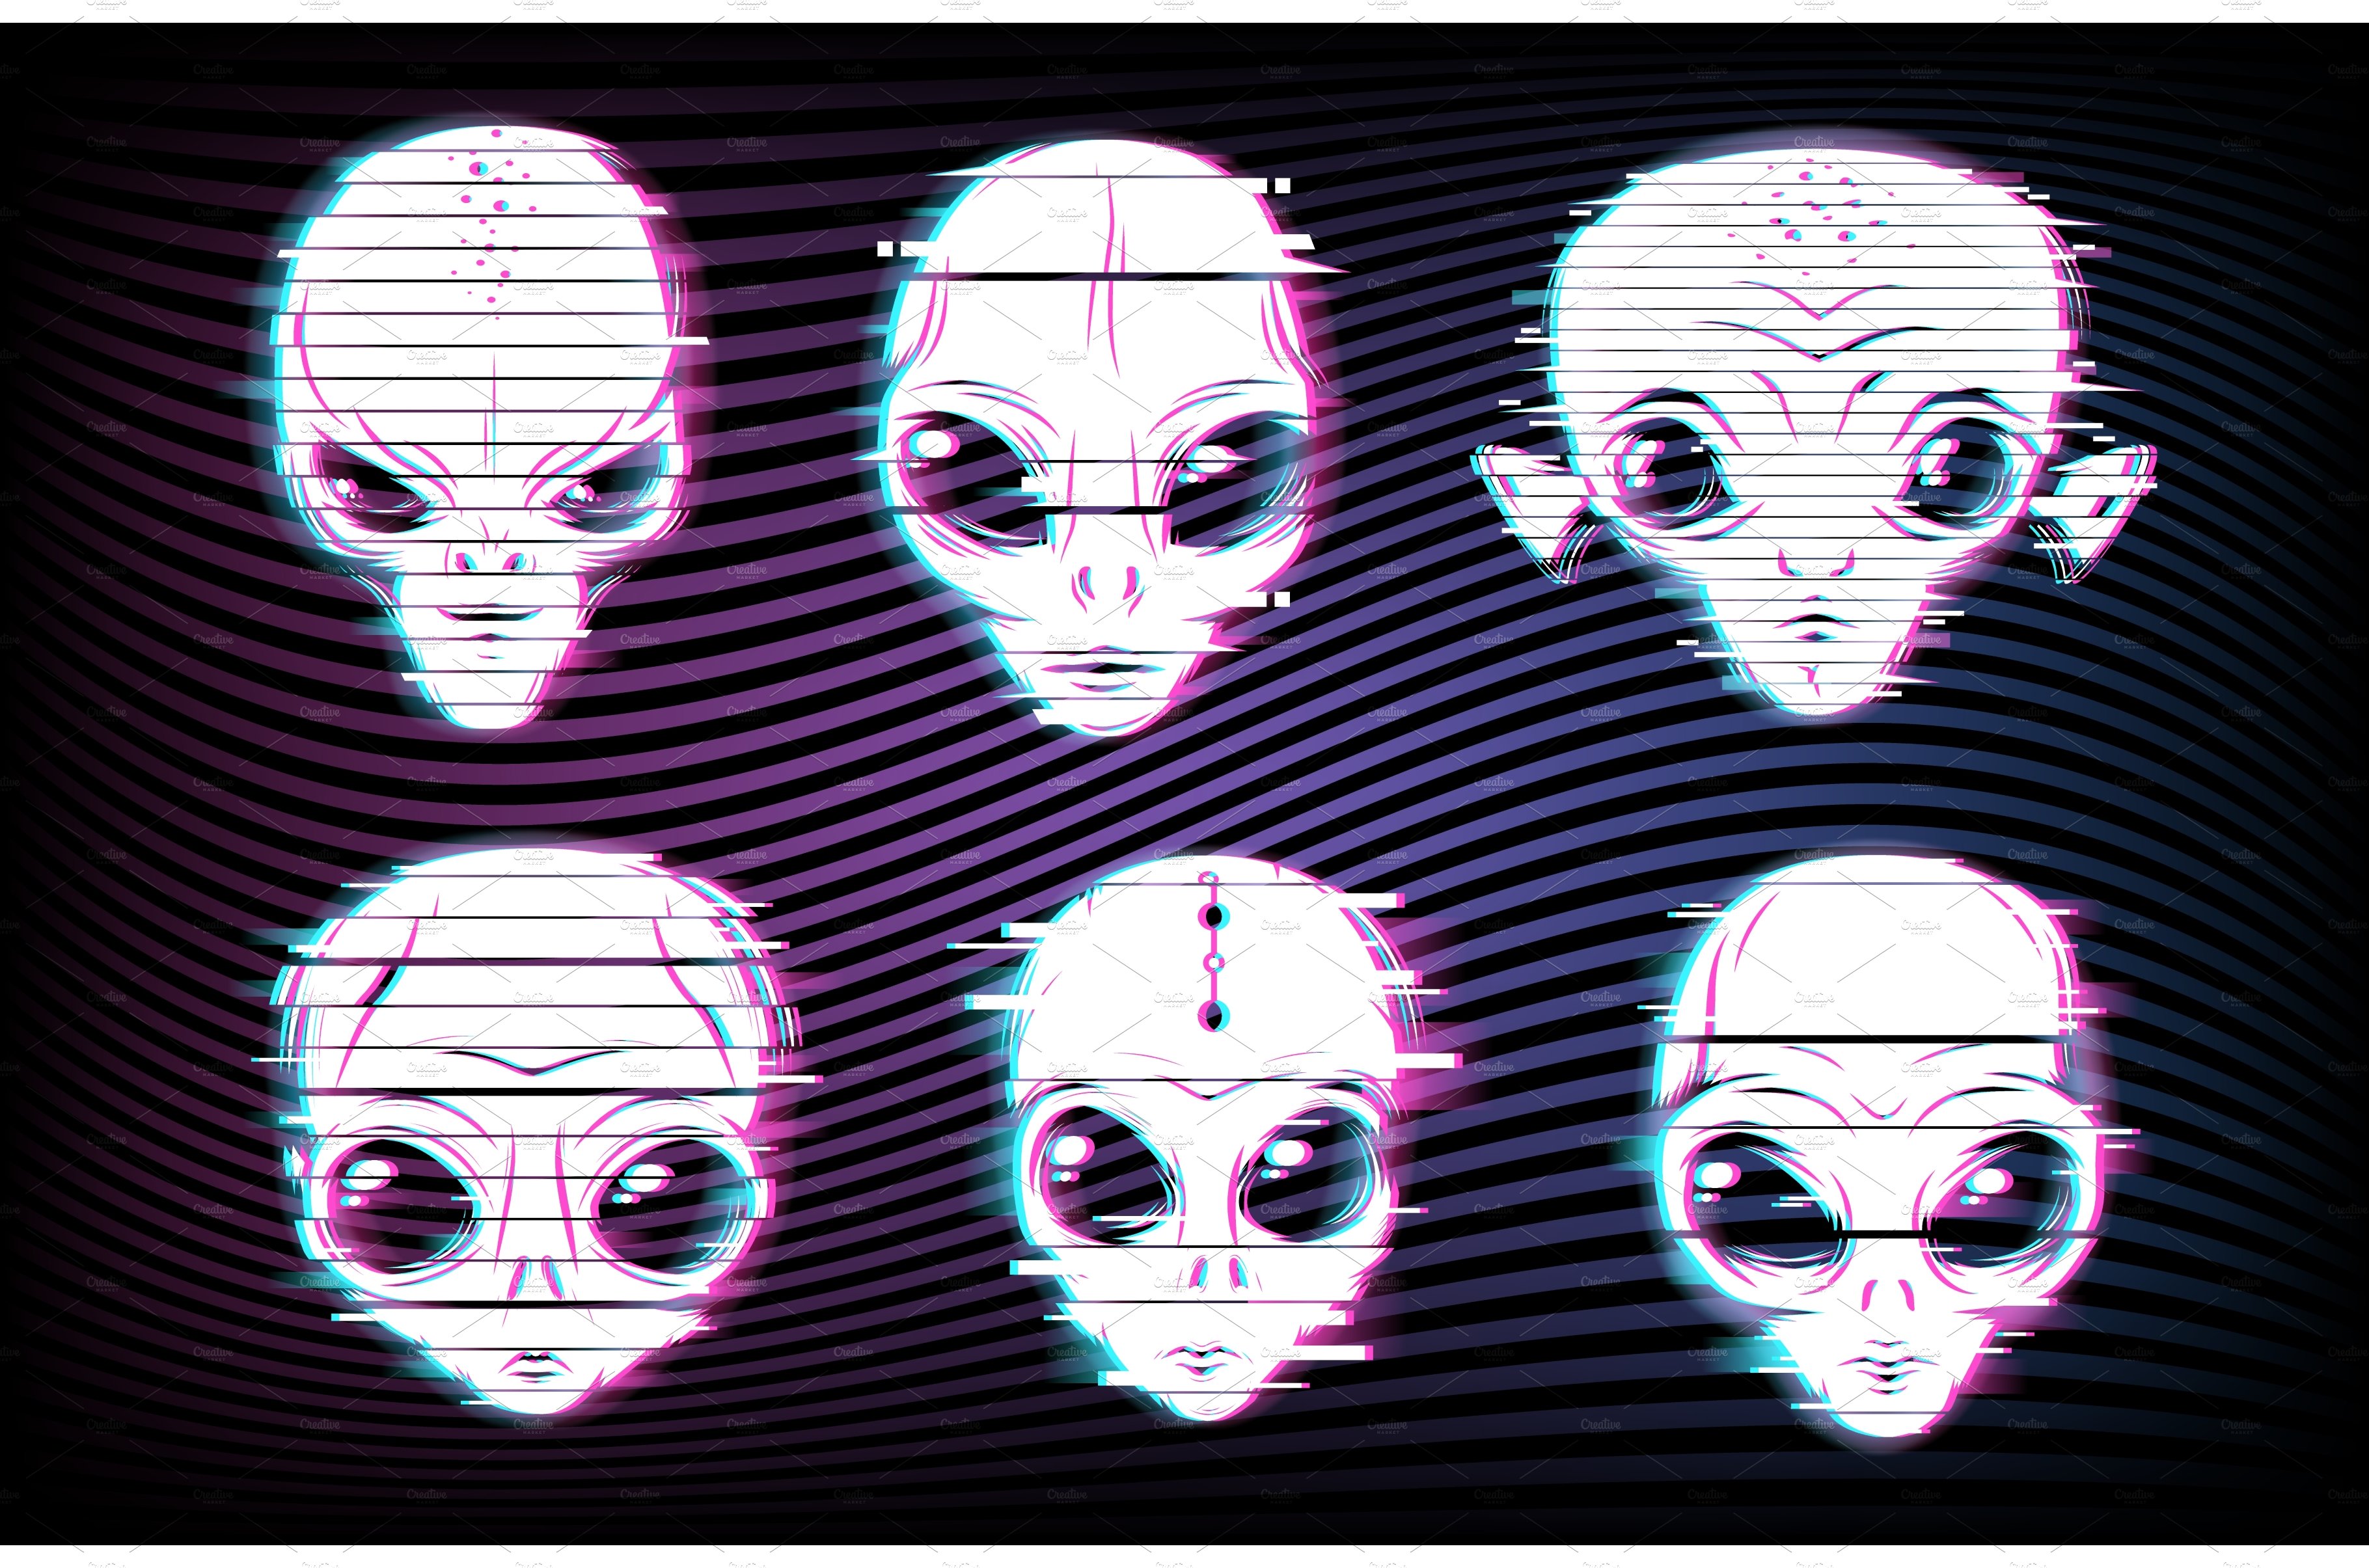 Alien faces or heads with glitch cover image.